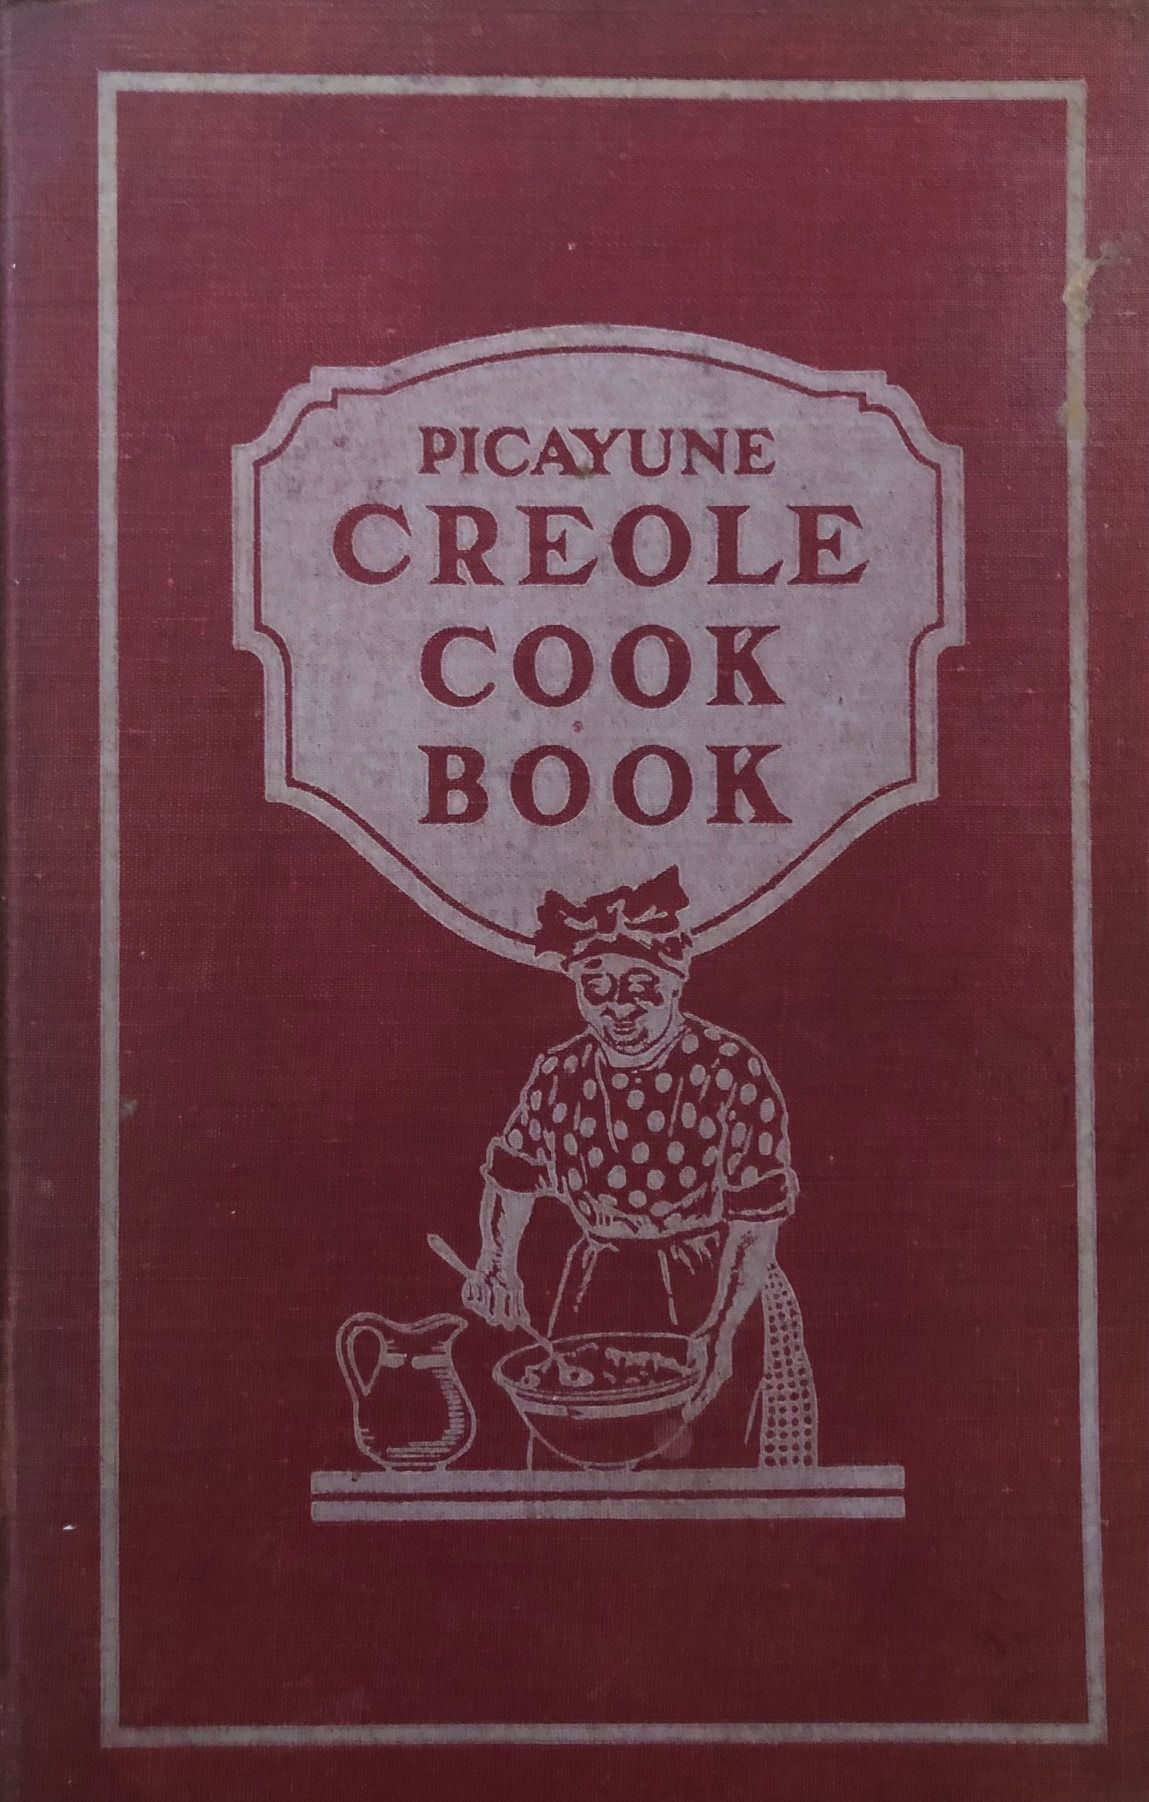 (*NEW ARRIVAL*) (Southern - Louisiana) The Original Picayune Creole Cook Book.